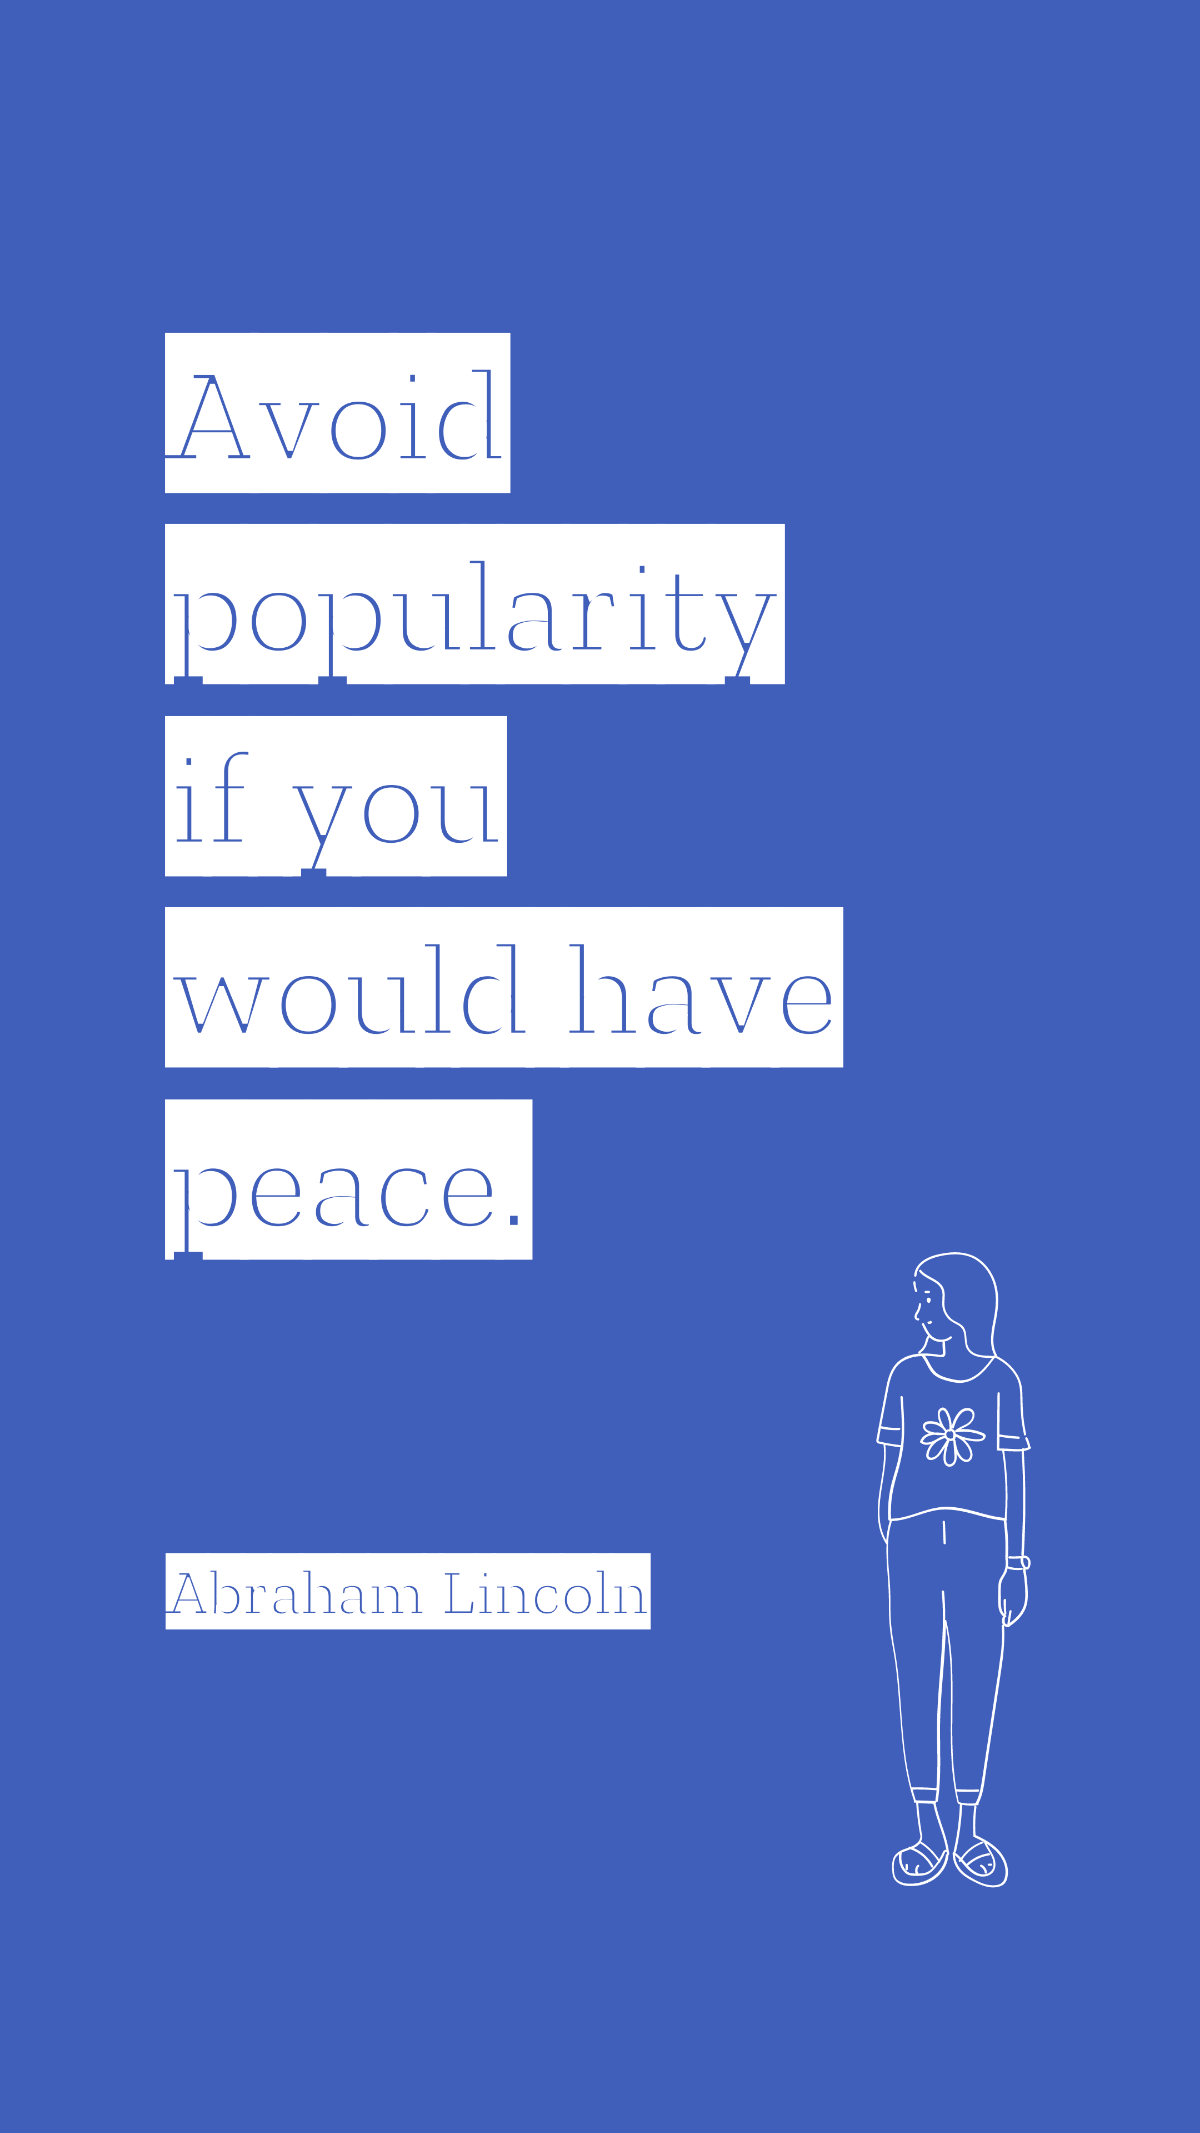 Abraham Lincoln - Avoid popularity if you would have peace. Template